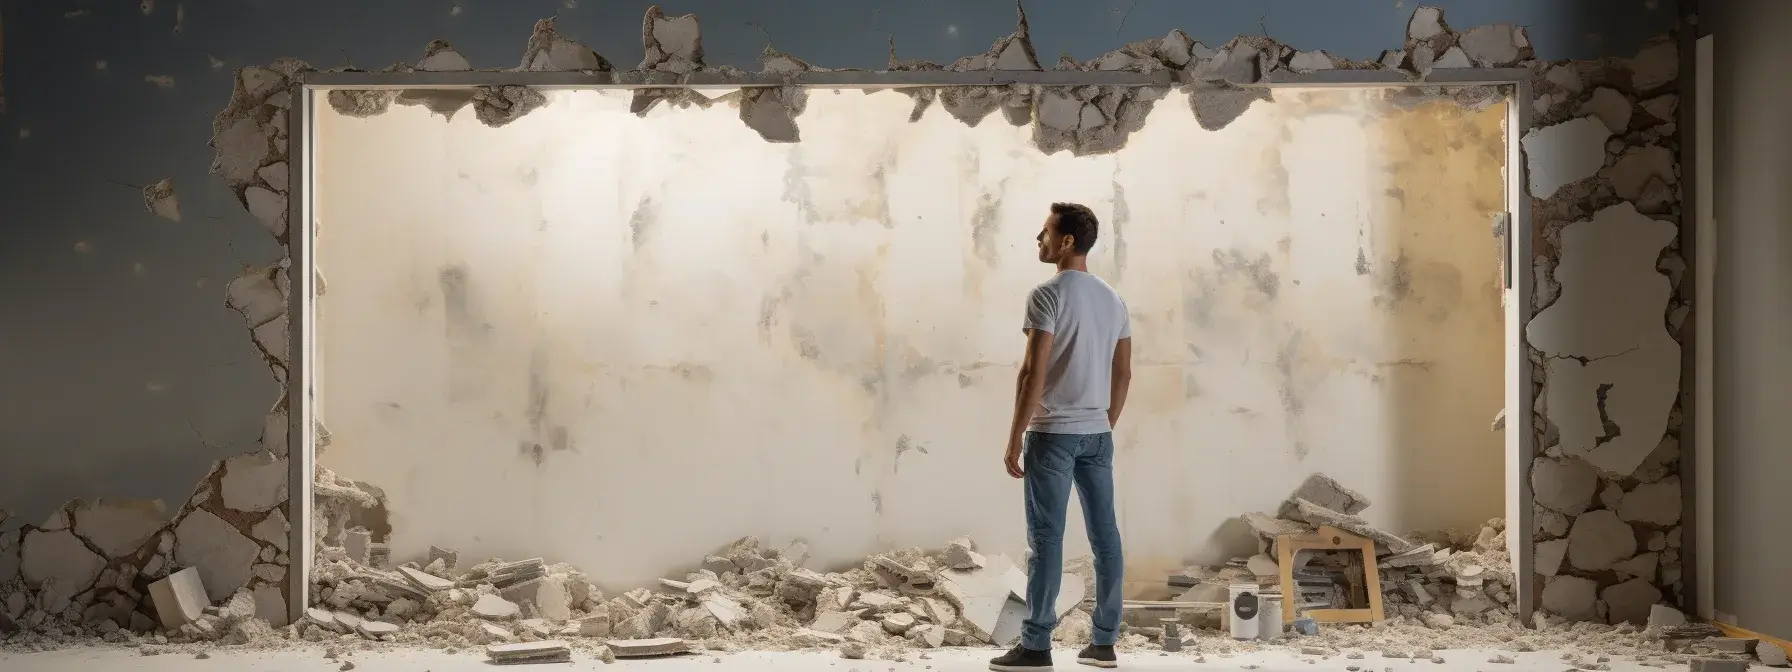 a person standing in front of a damaged drywall, contemplating whether to tackle the repair themselves or hire a professional.